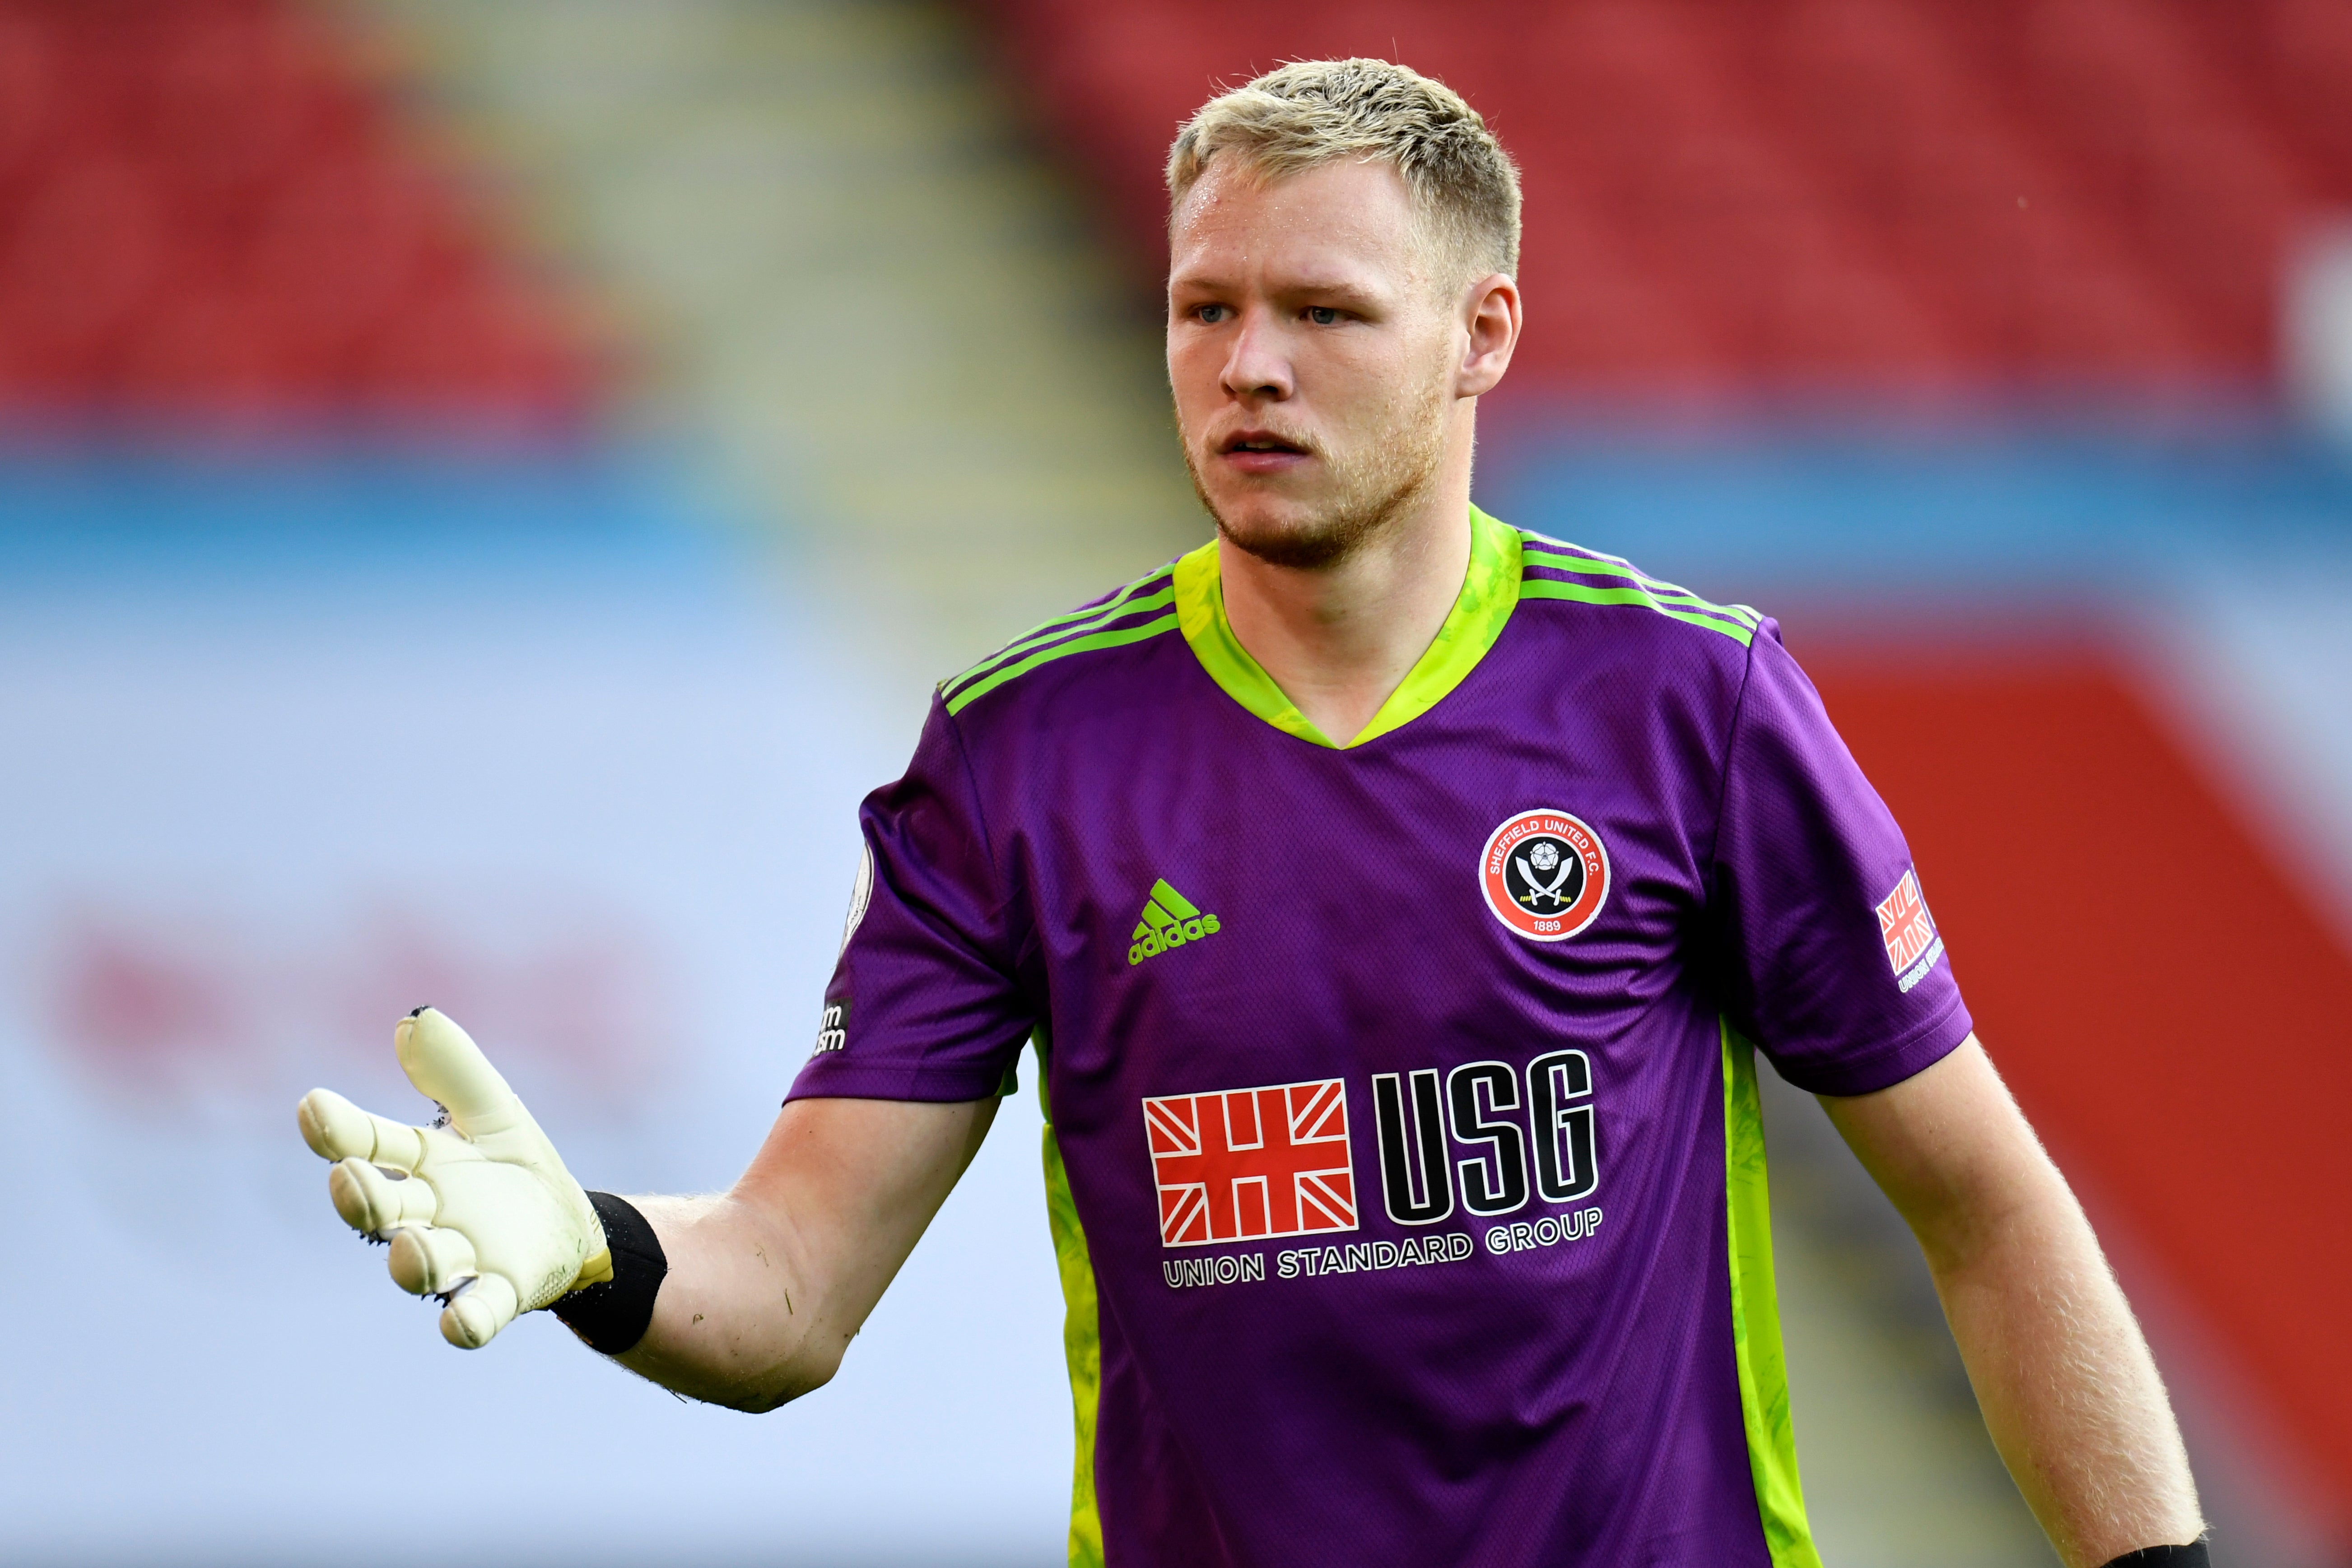 Goalkeeper Aaron Ramsdale joined Sheffield United from Bournemouth in 2020